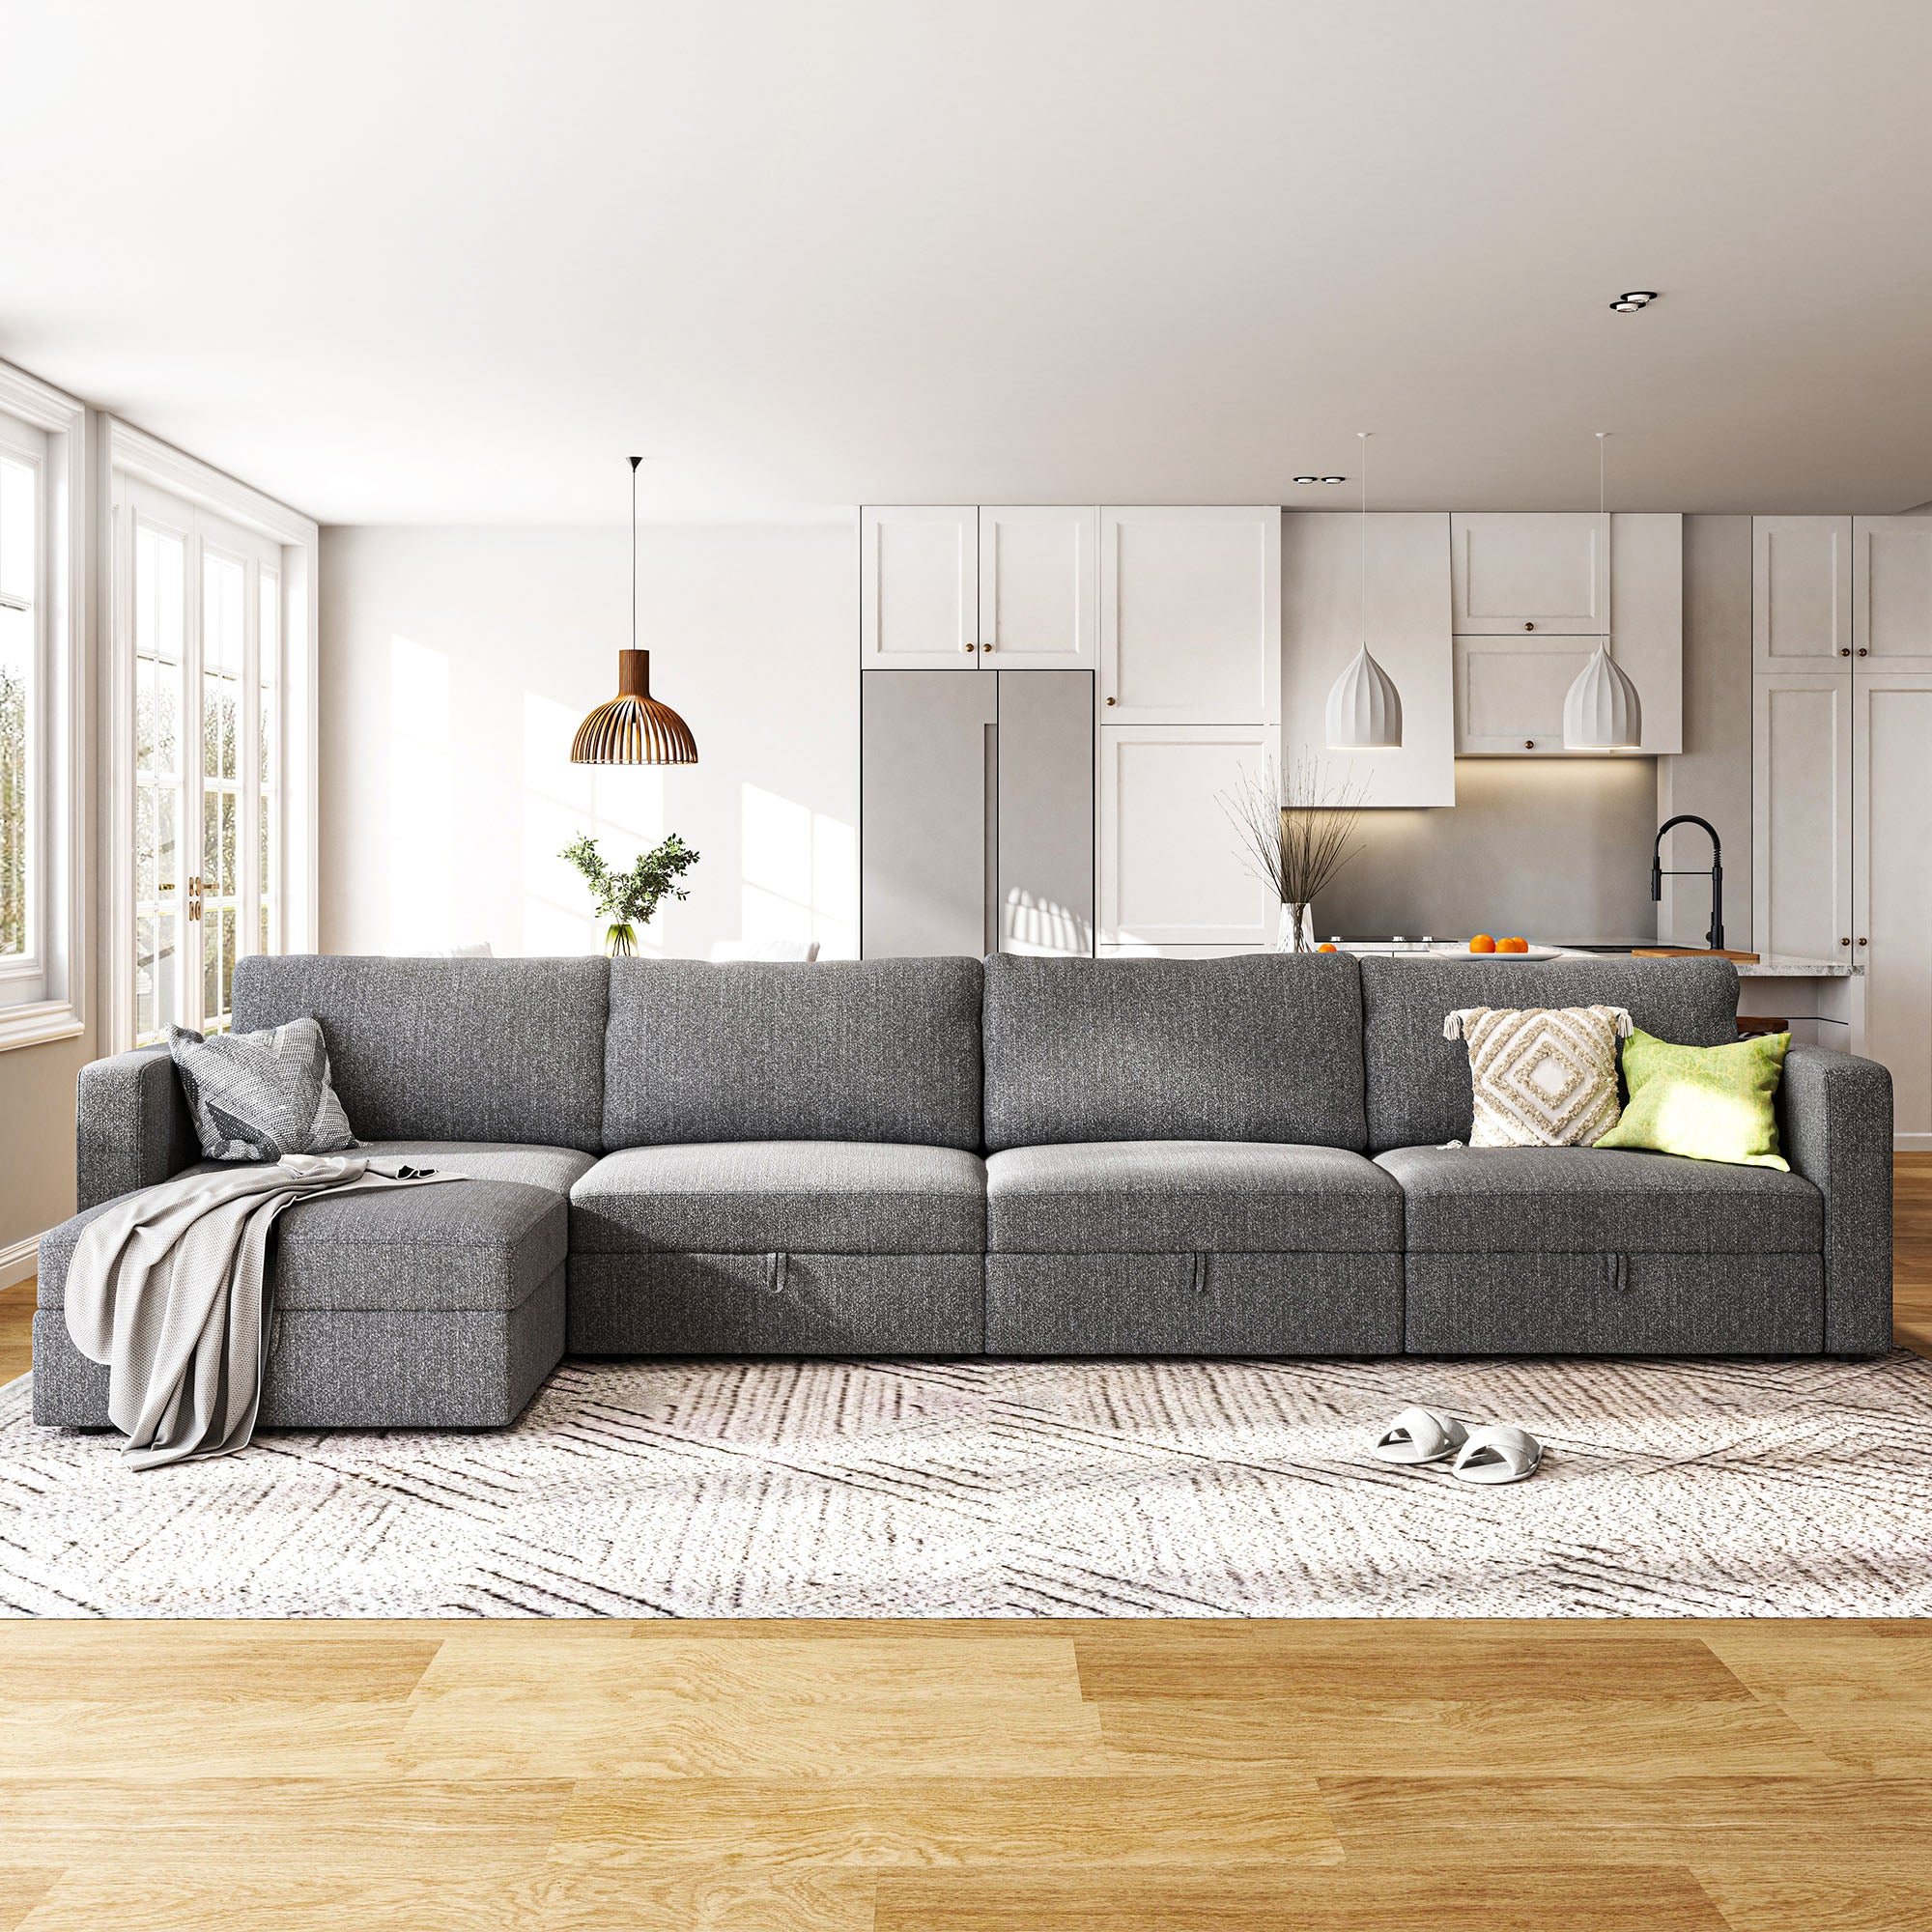 4 Seaters Wider Modular Sectional Sofa